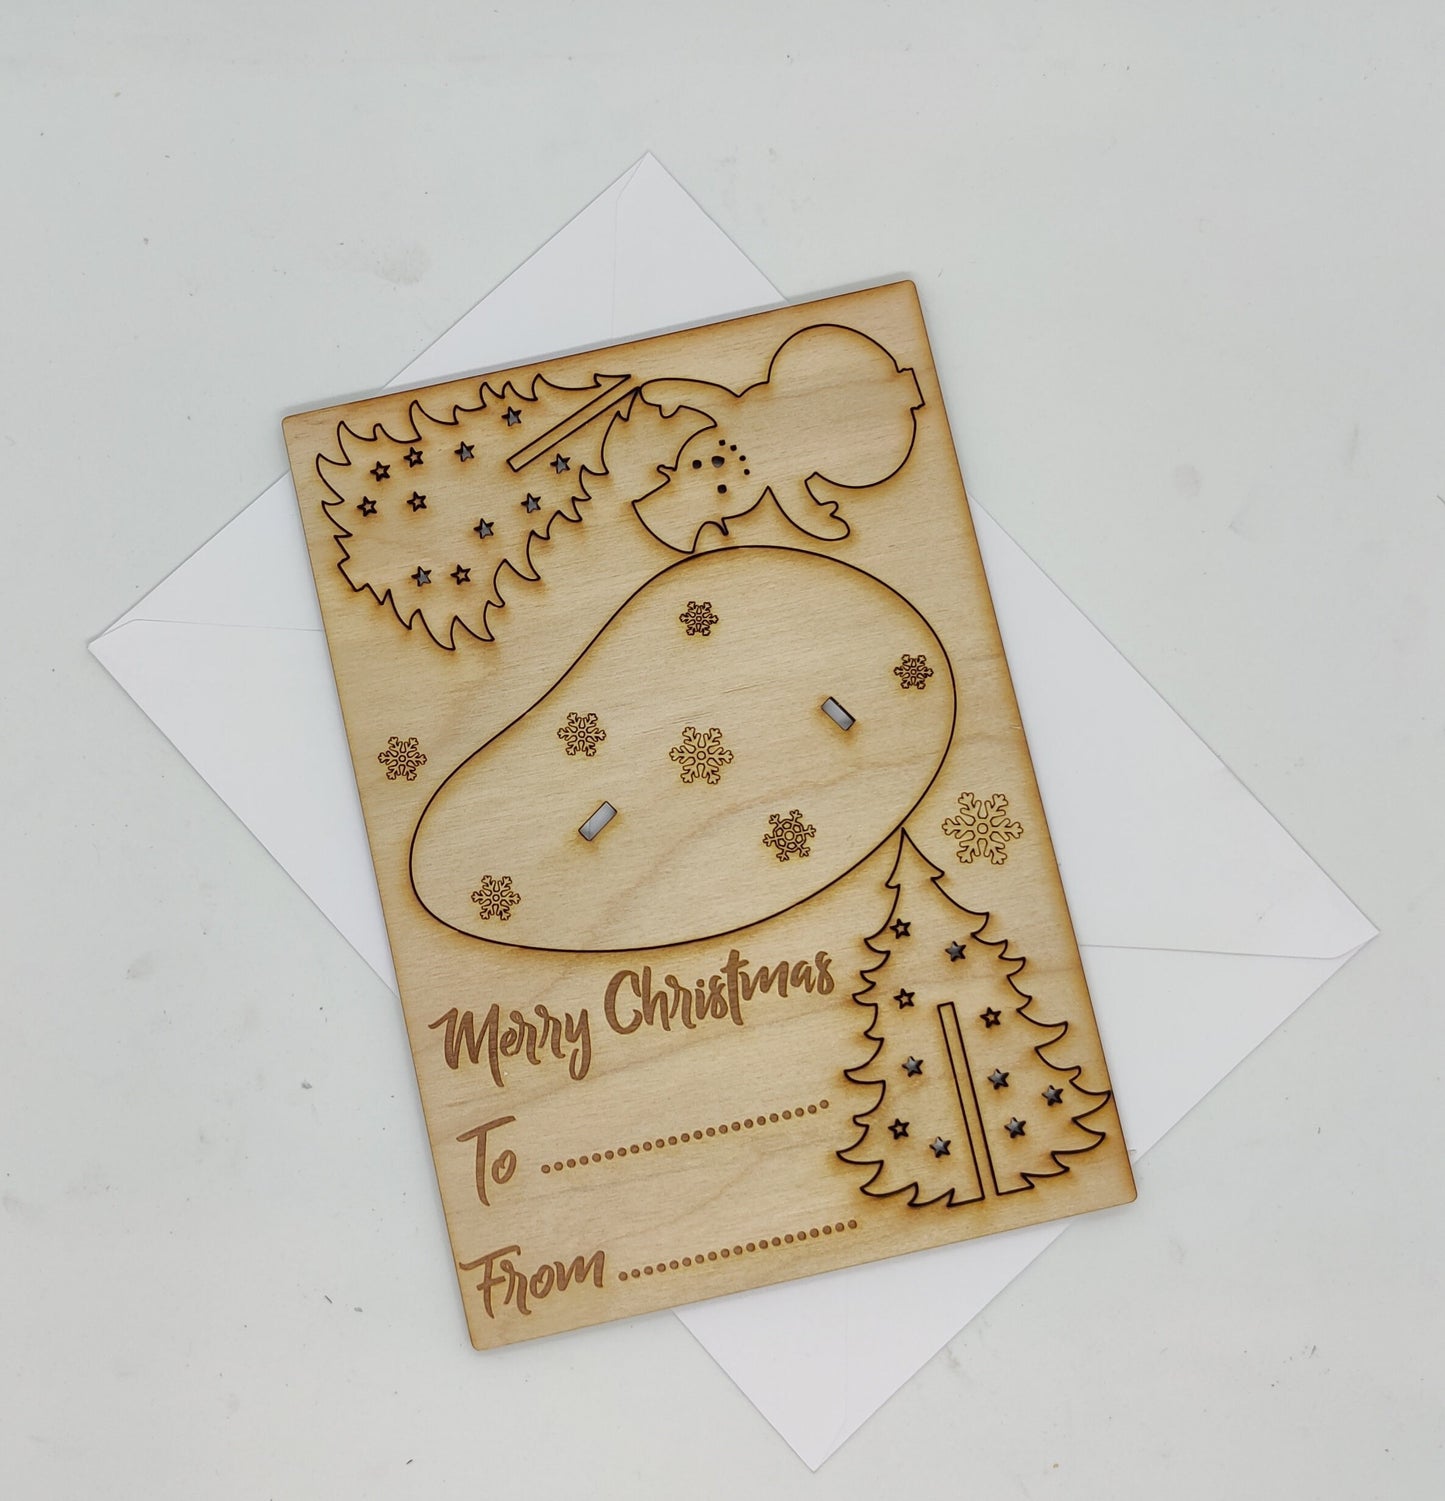 Snowman Christmas card Model made from Wood